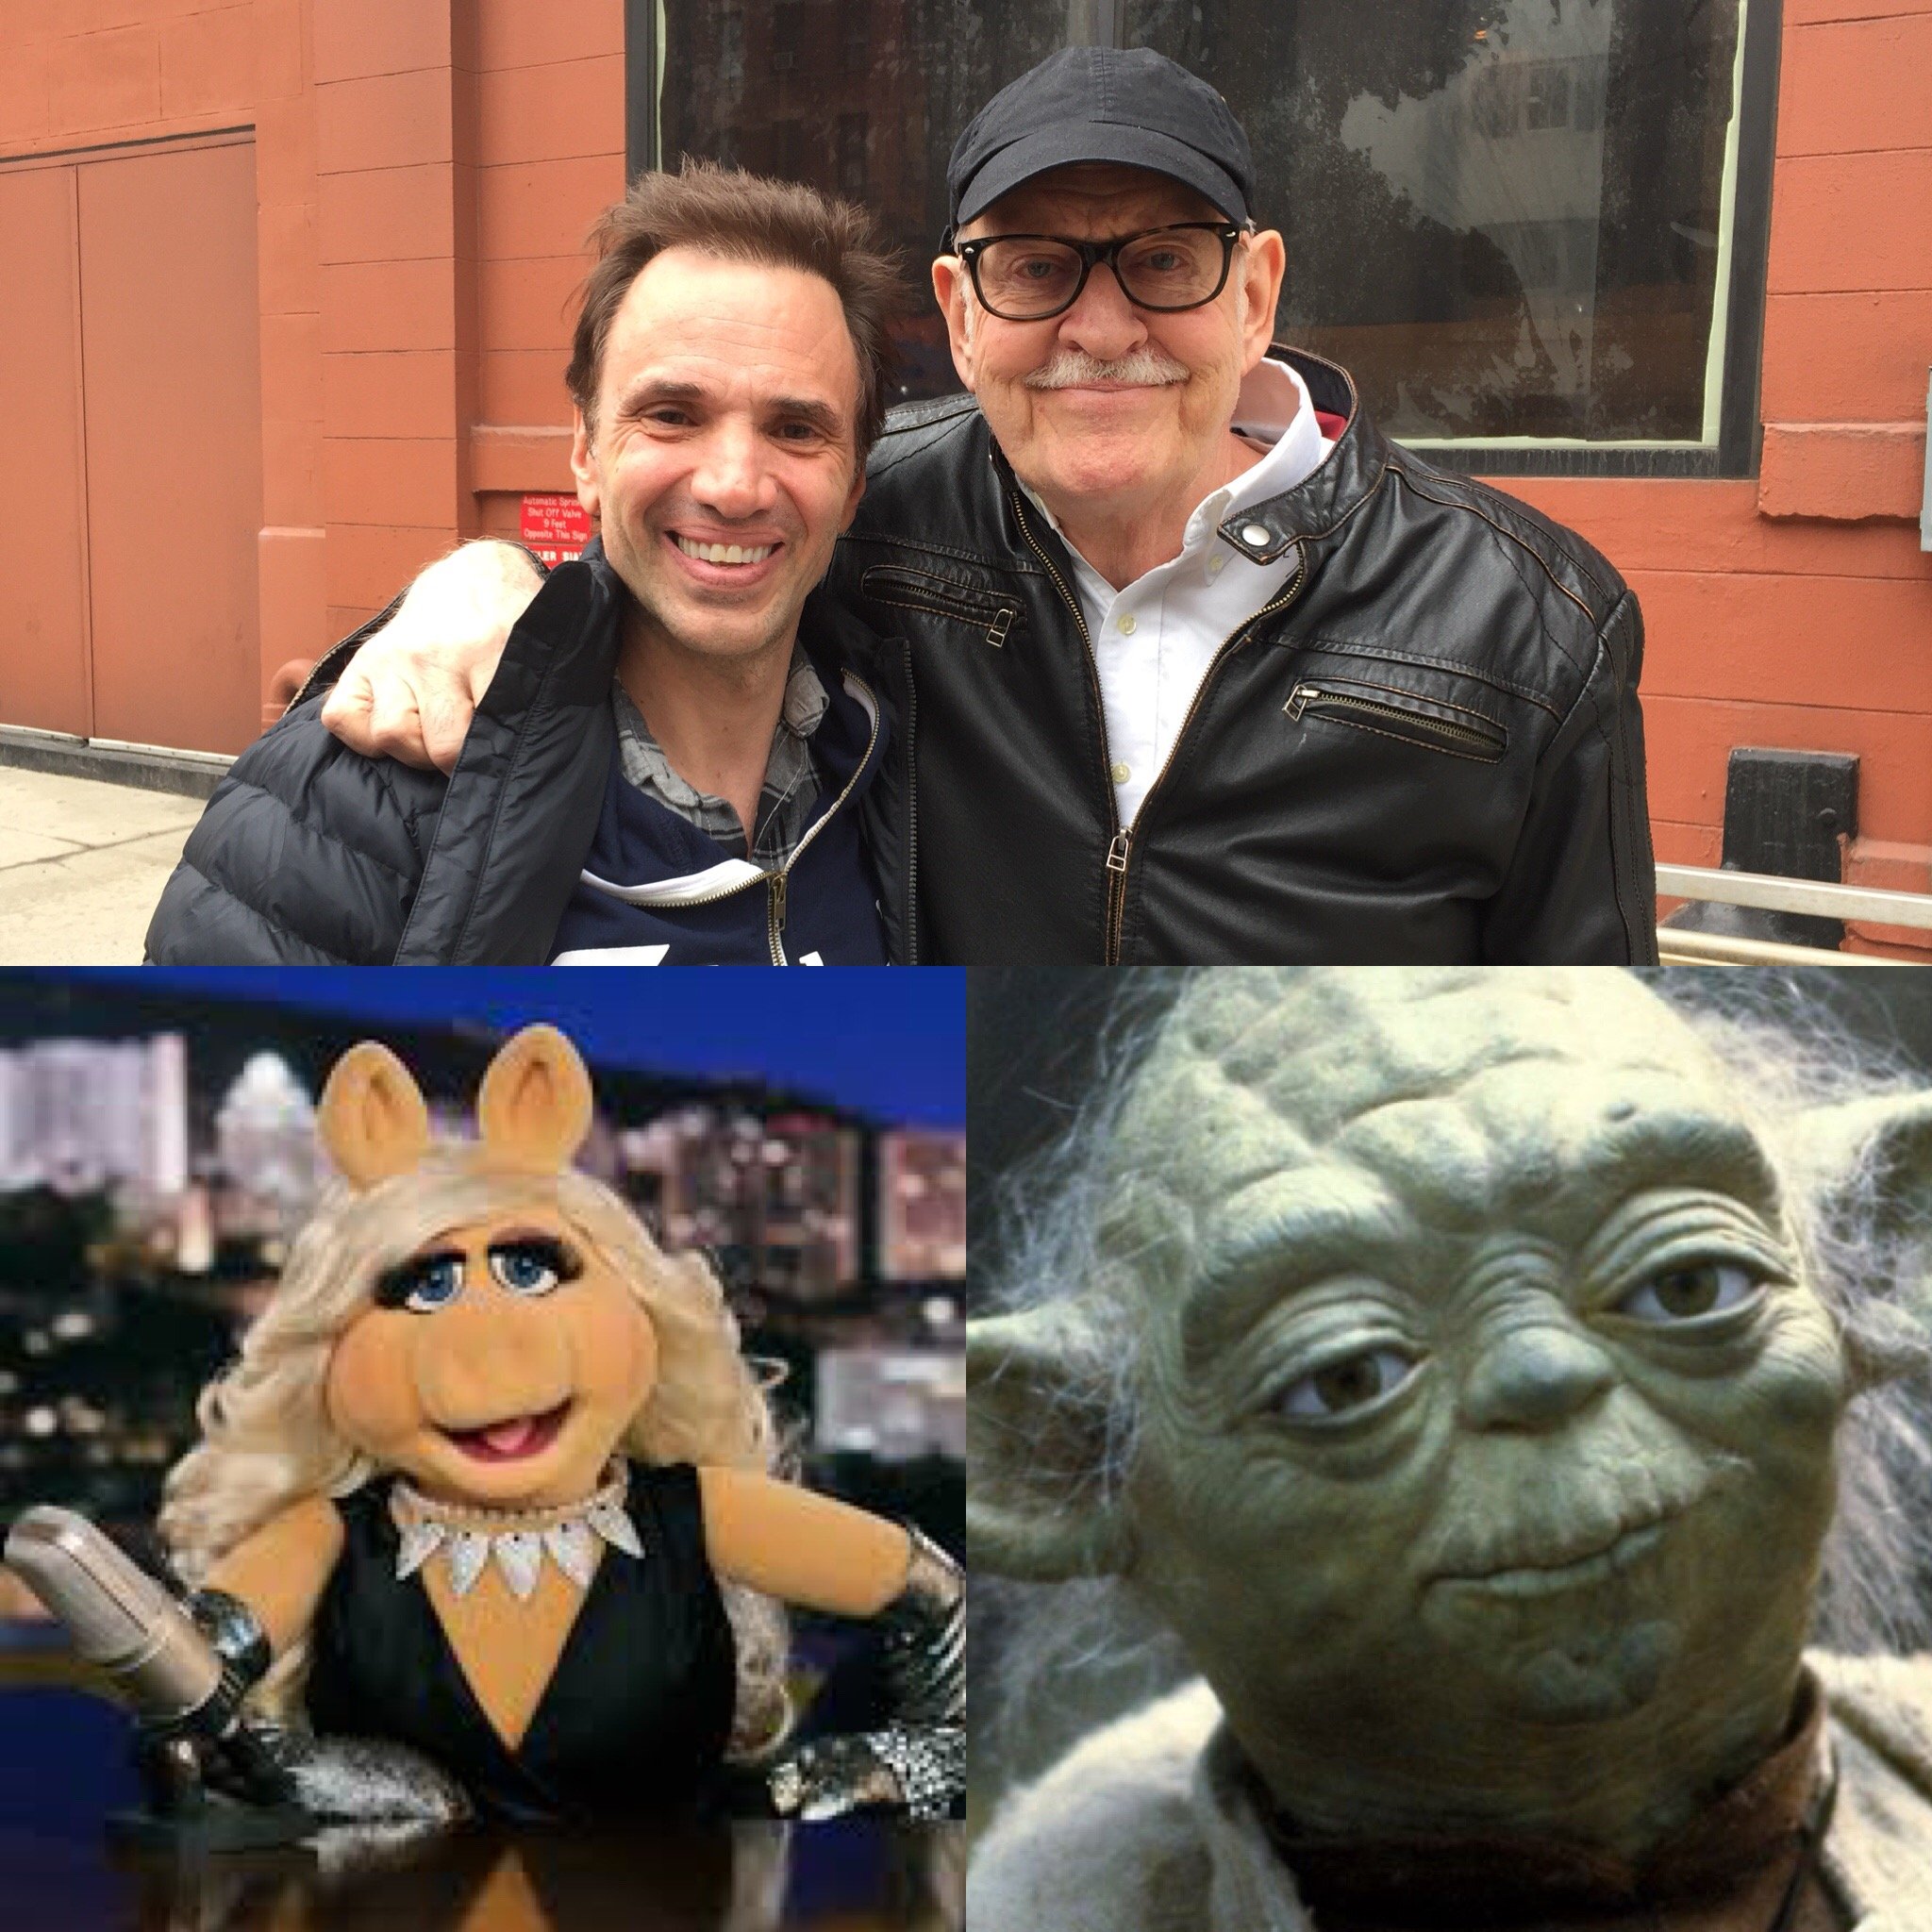 Paul and Frank oz w-muppets and Yoda.JPG